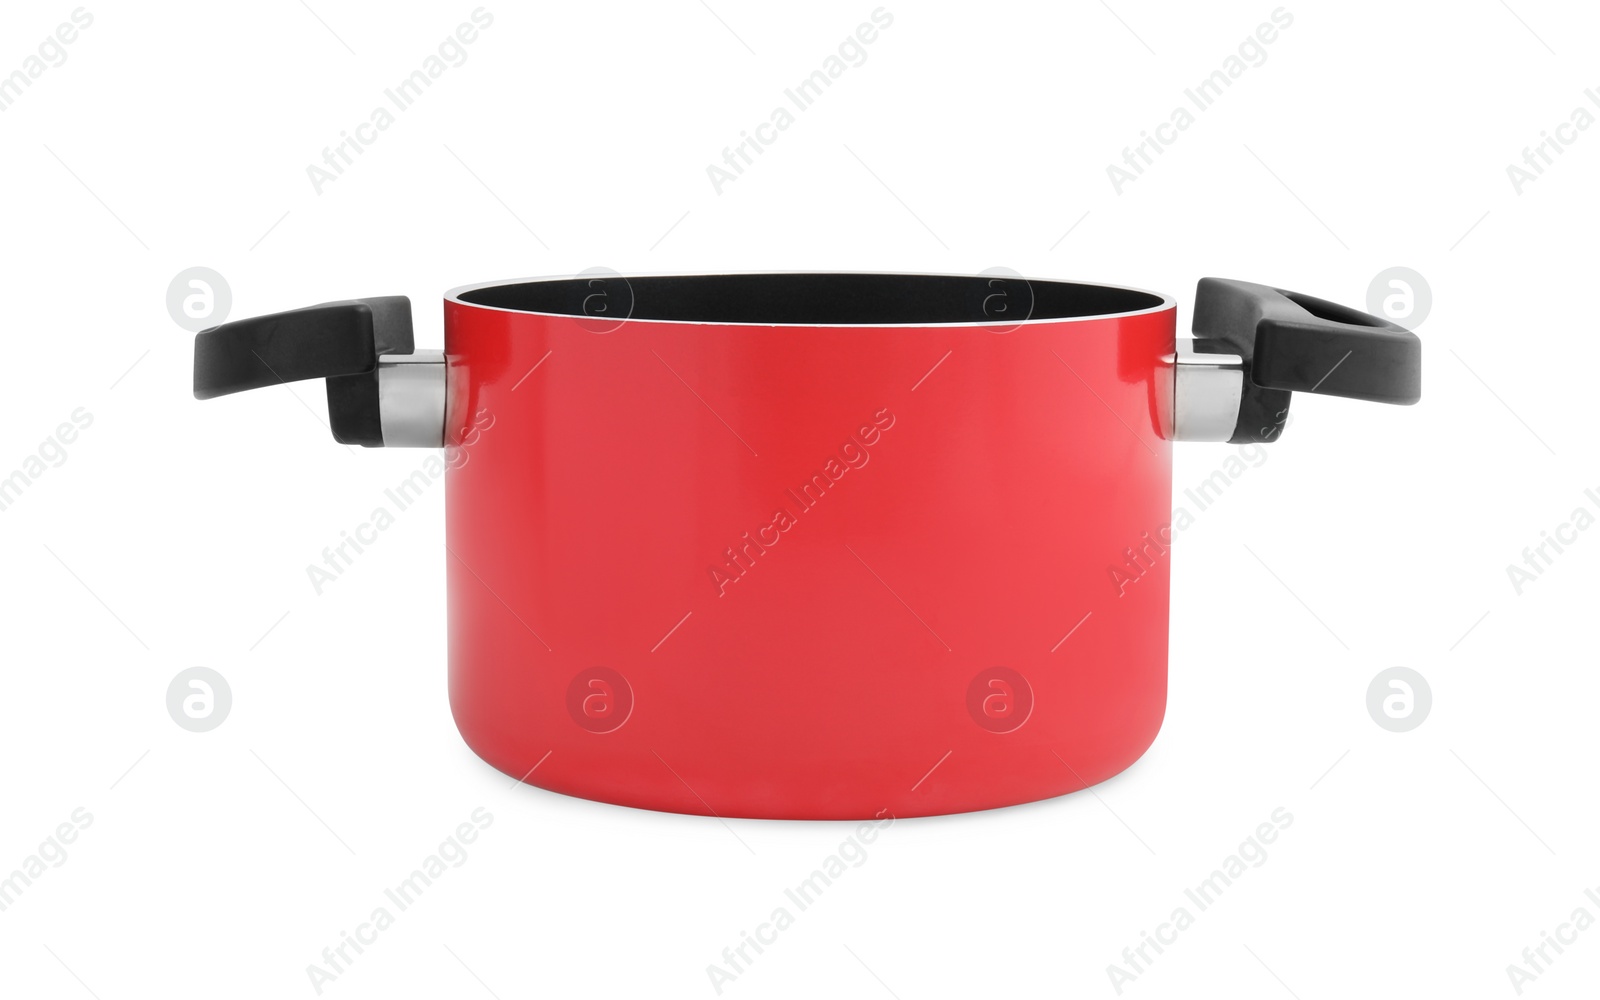 Photo of One empty pot with handles isolated on white